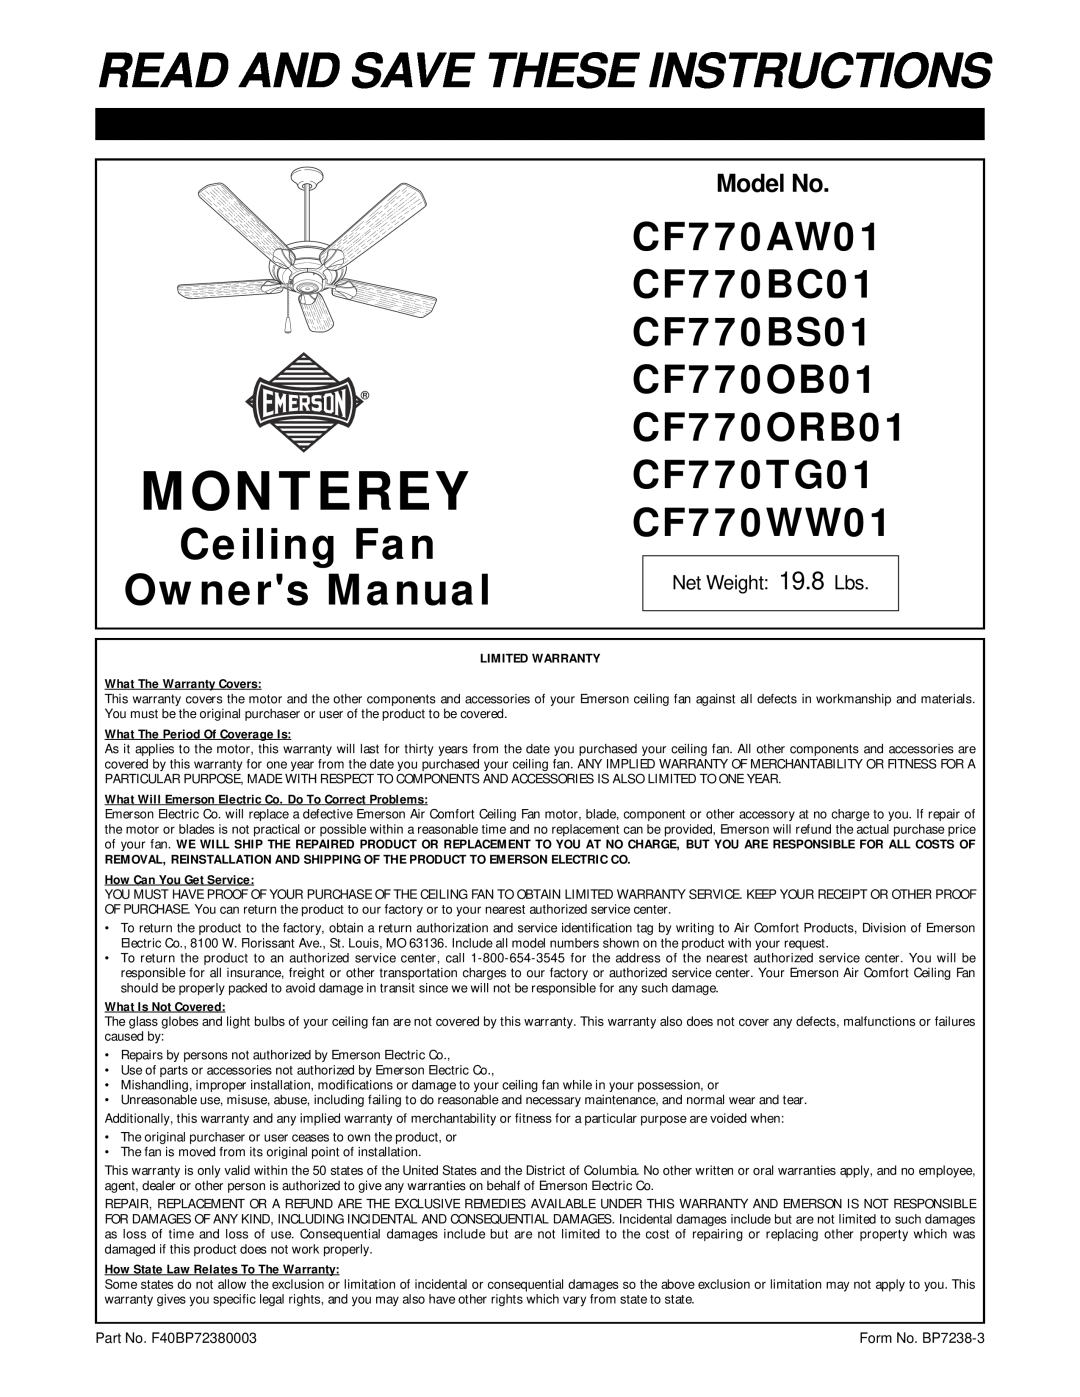 Emerson CF770BS01 owner manual Model No, Monterey, Read And Save These Instructions, CF770ORB01, CF770TG01 CF770WW01 